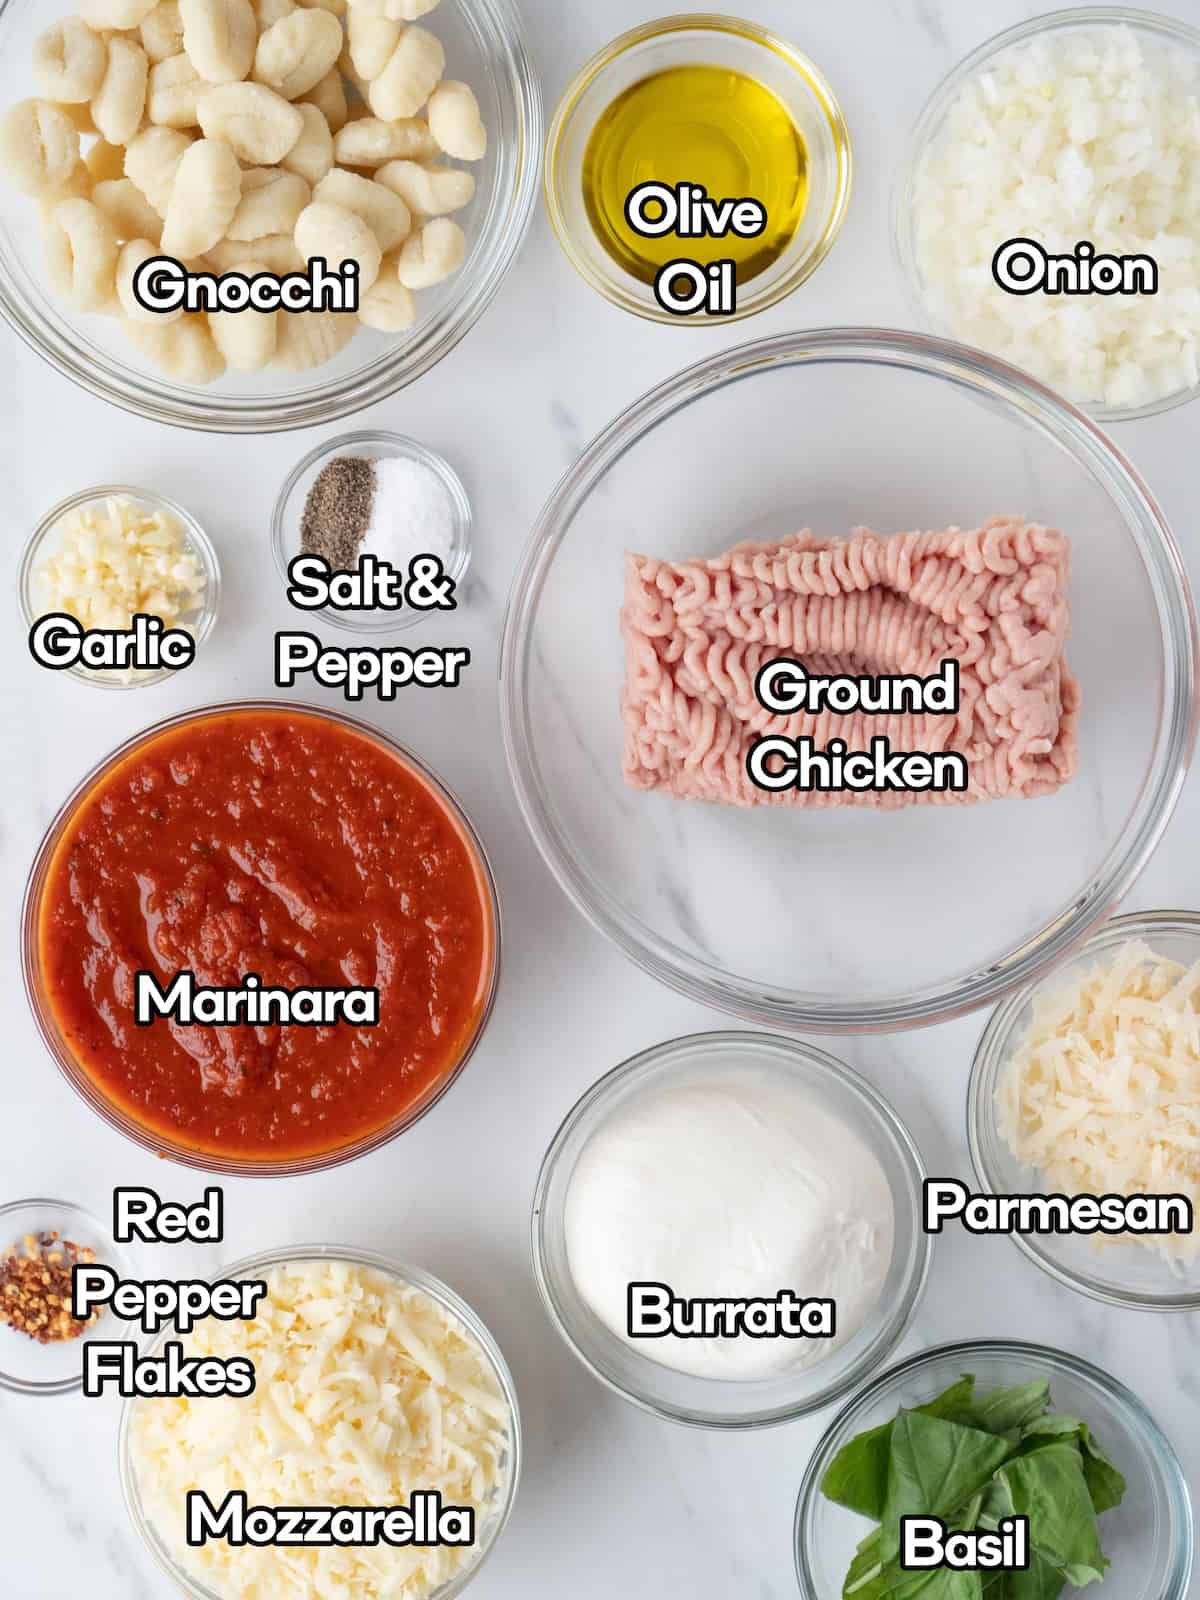 Mise-en-place of all the ingredients to make chicken parmesan gnocchi bake.